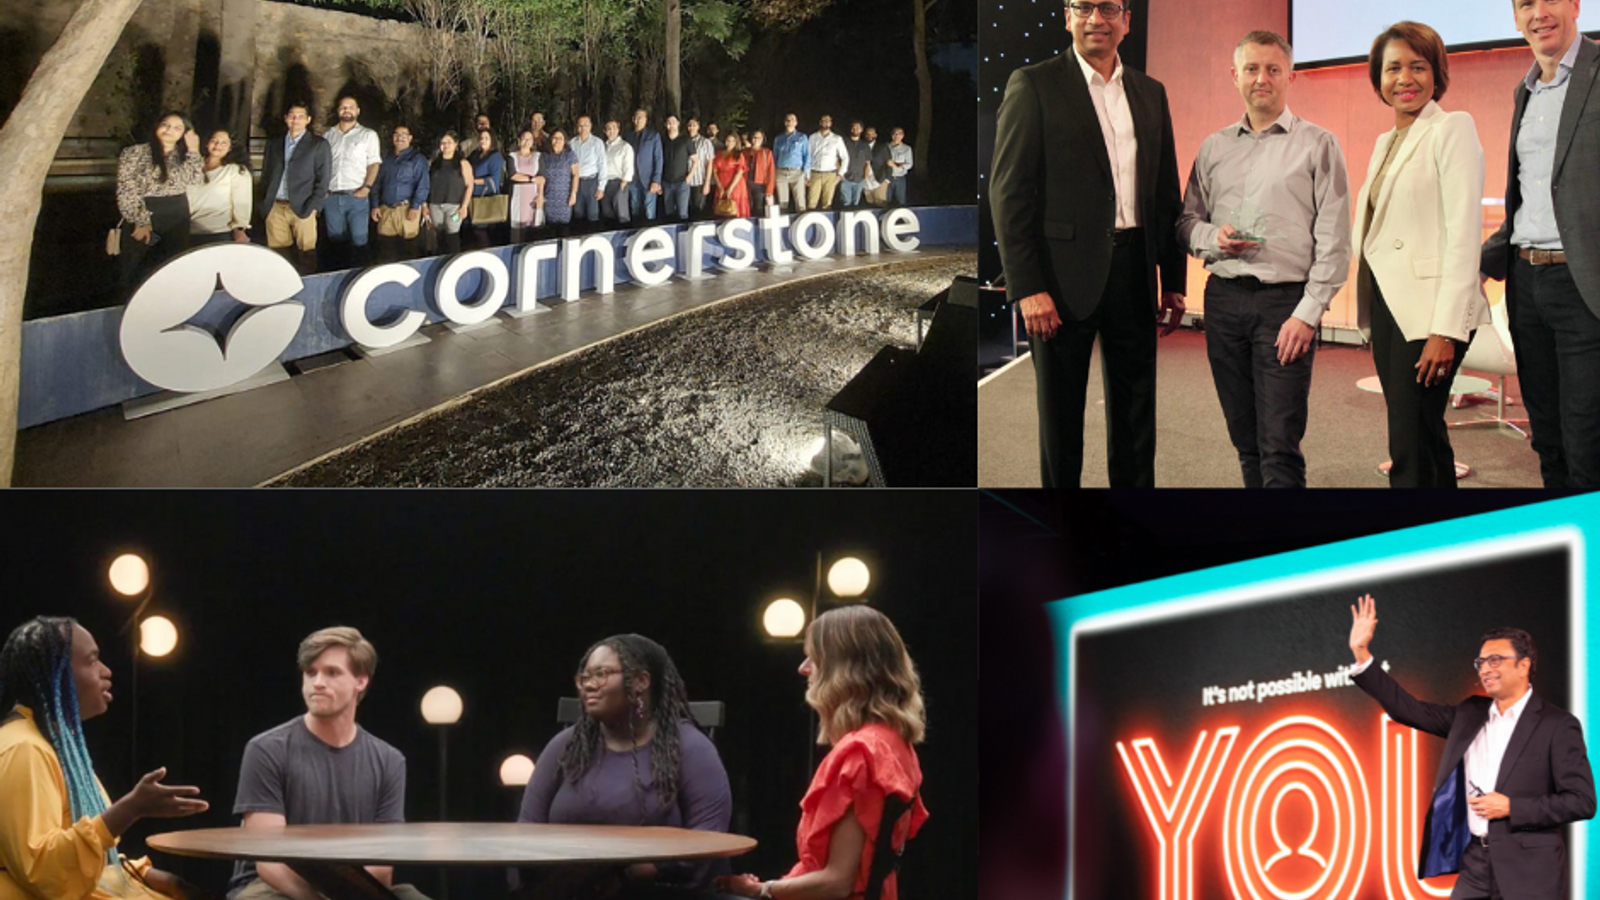 Cheers to a year of innovation – closing out Q4 strong at Cornerstone  